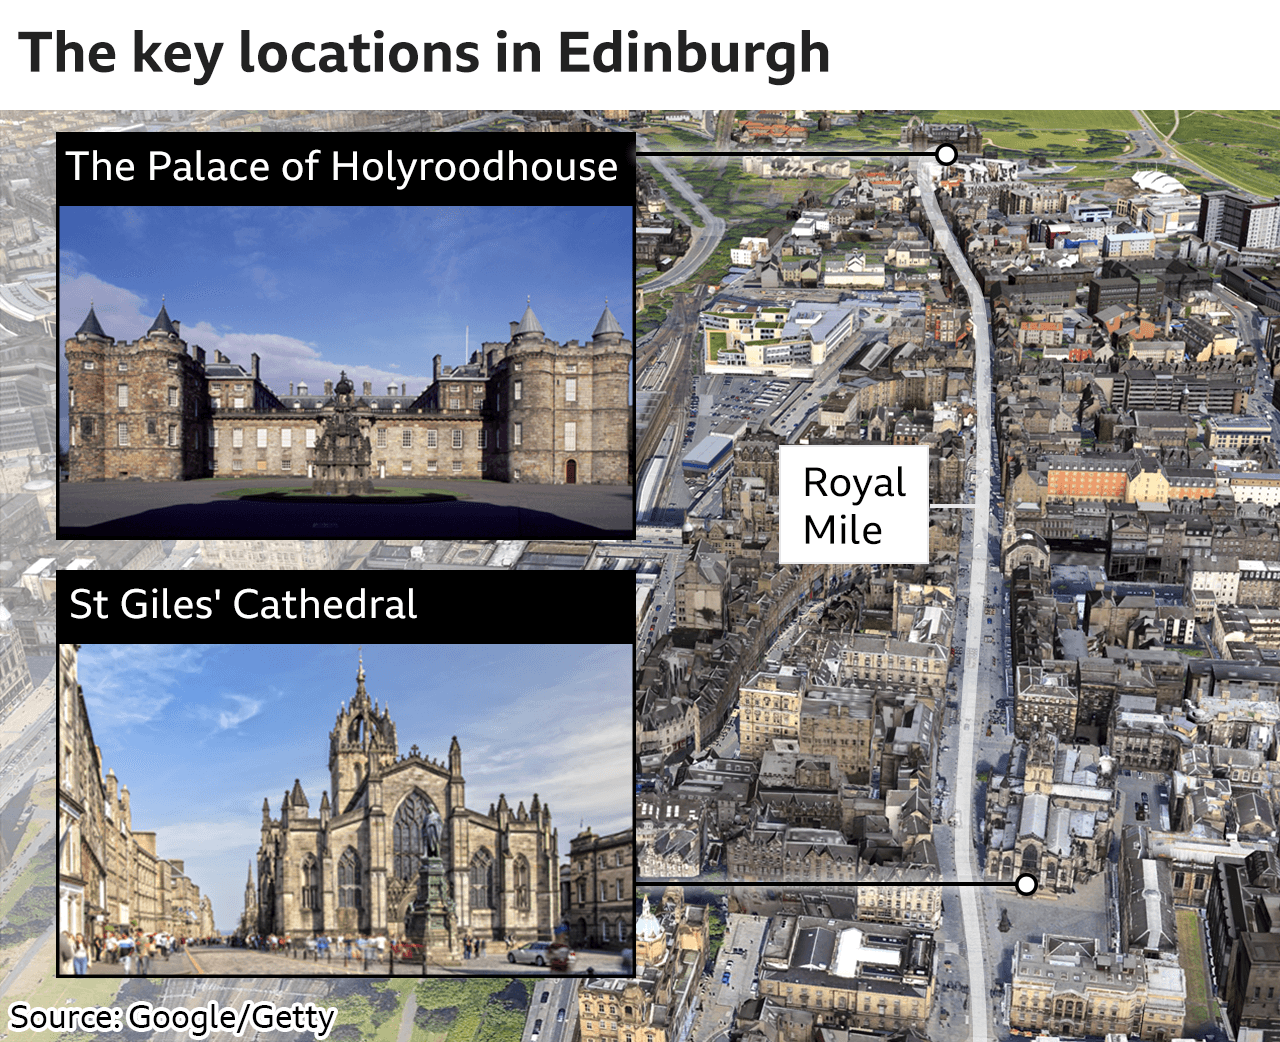 Map showing the key locations in Edinburgh: The Palace of Holyroodhouse and St Giles' Cathedral